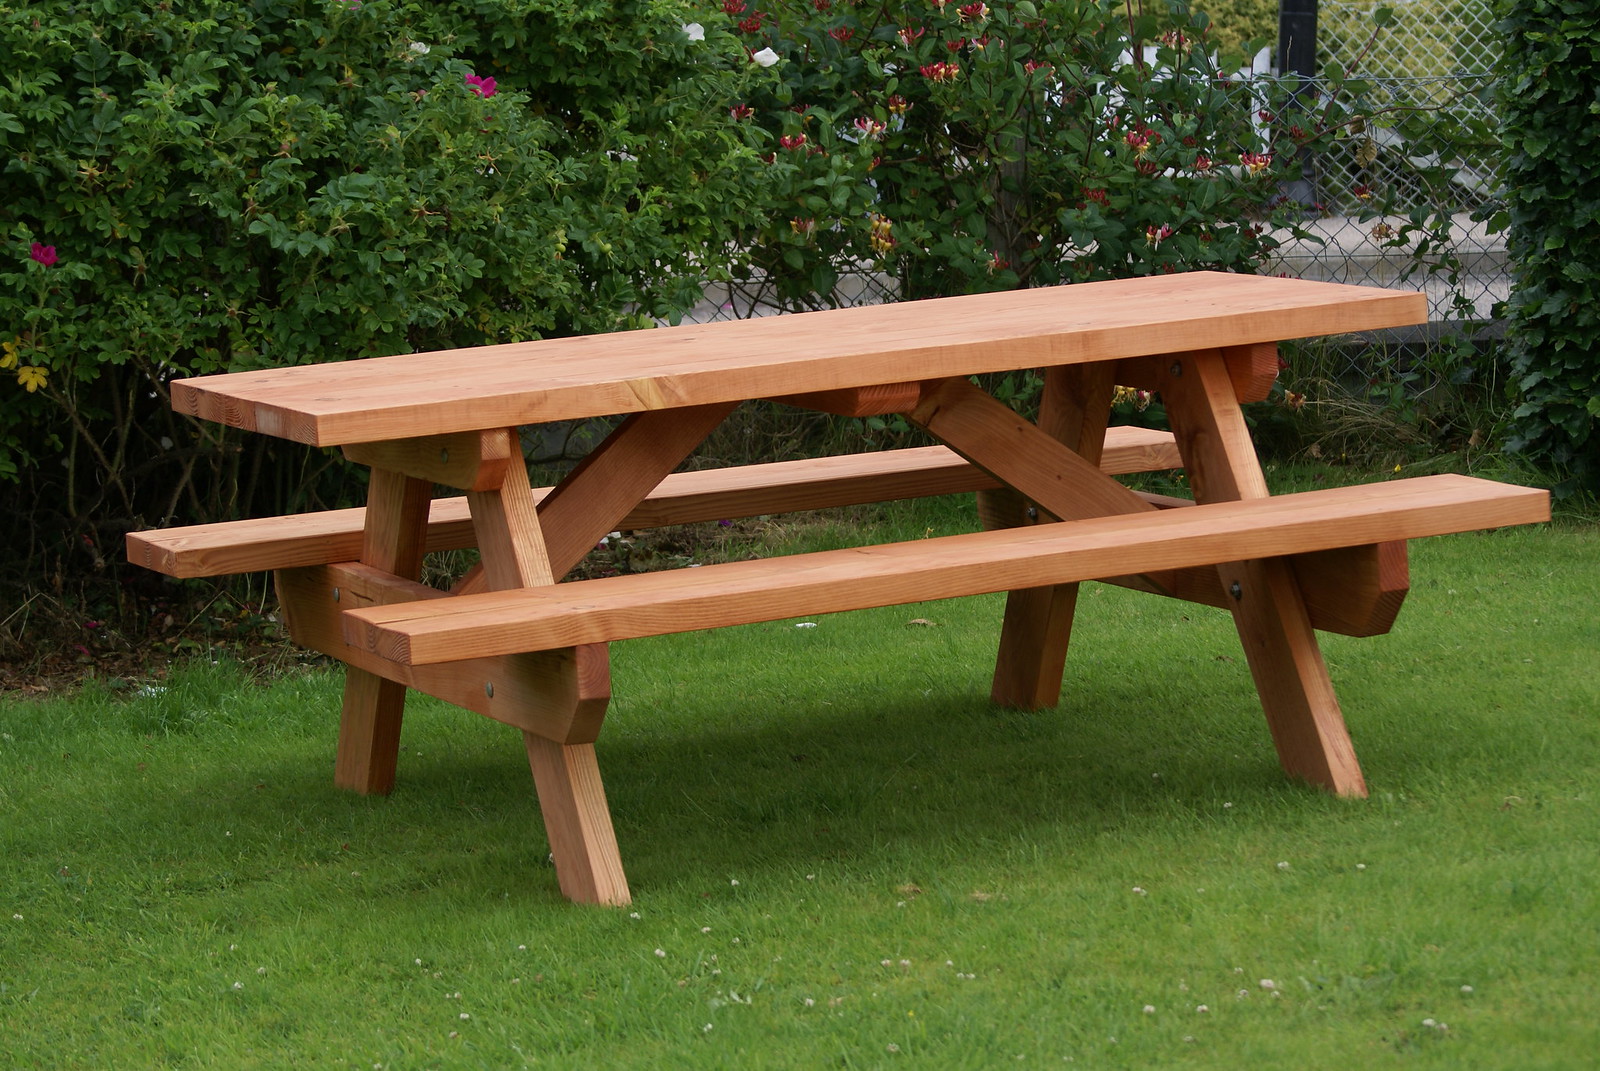 How to Build a Picnic Table – DIY Plans